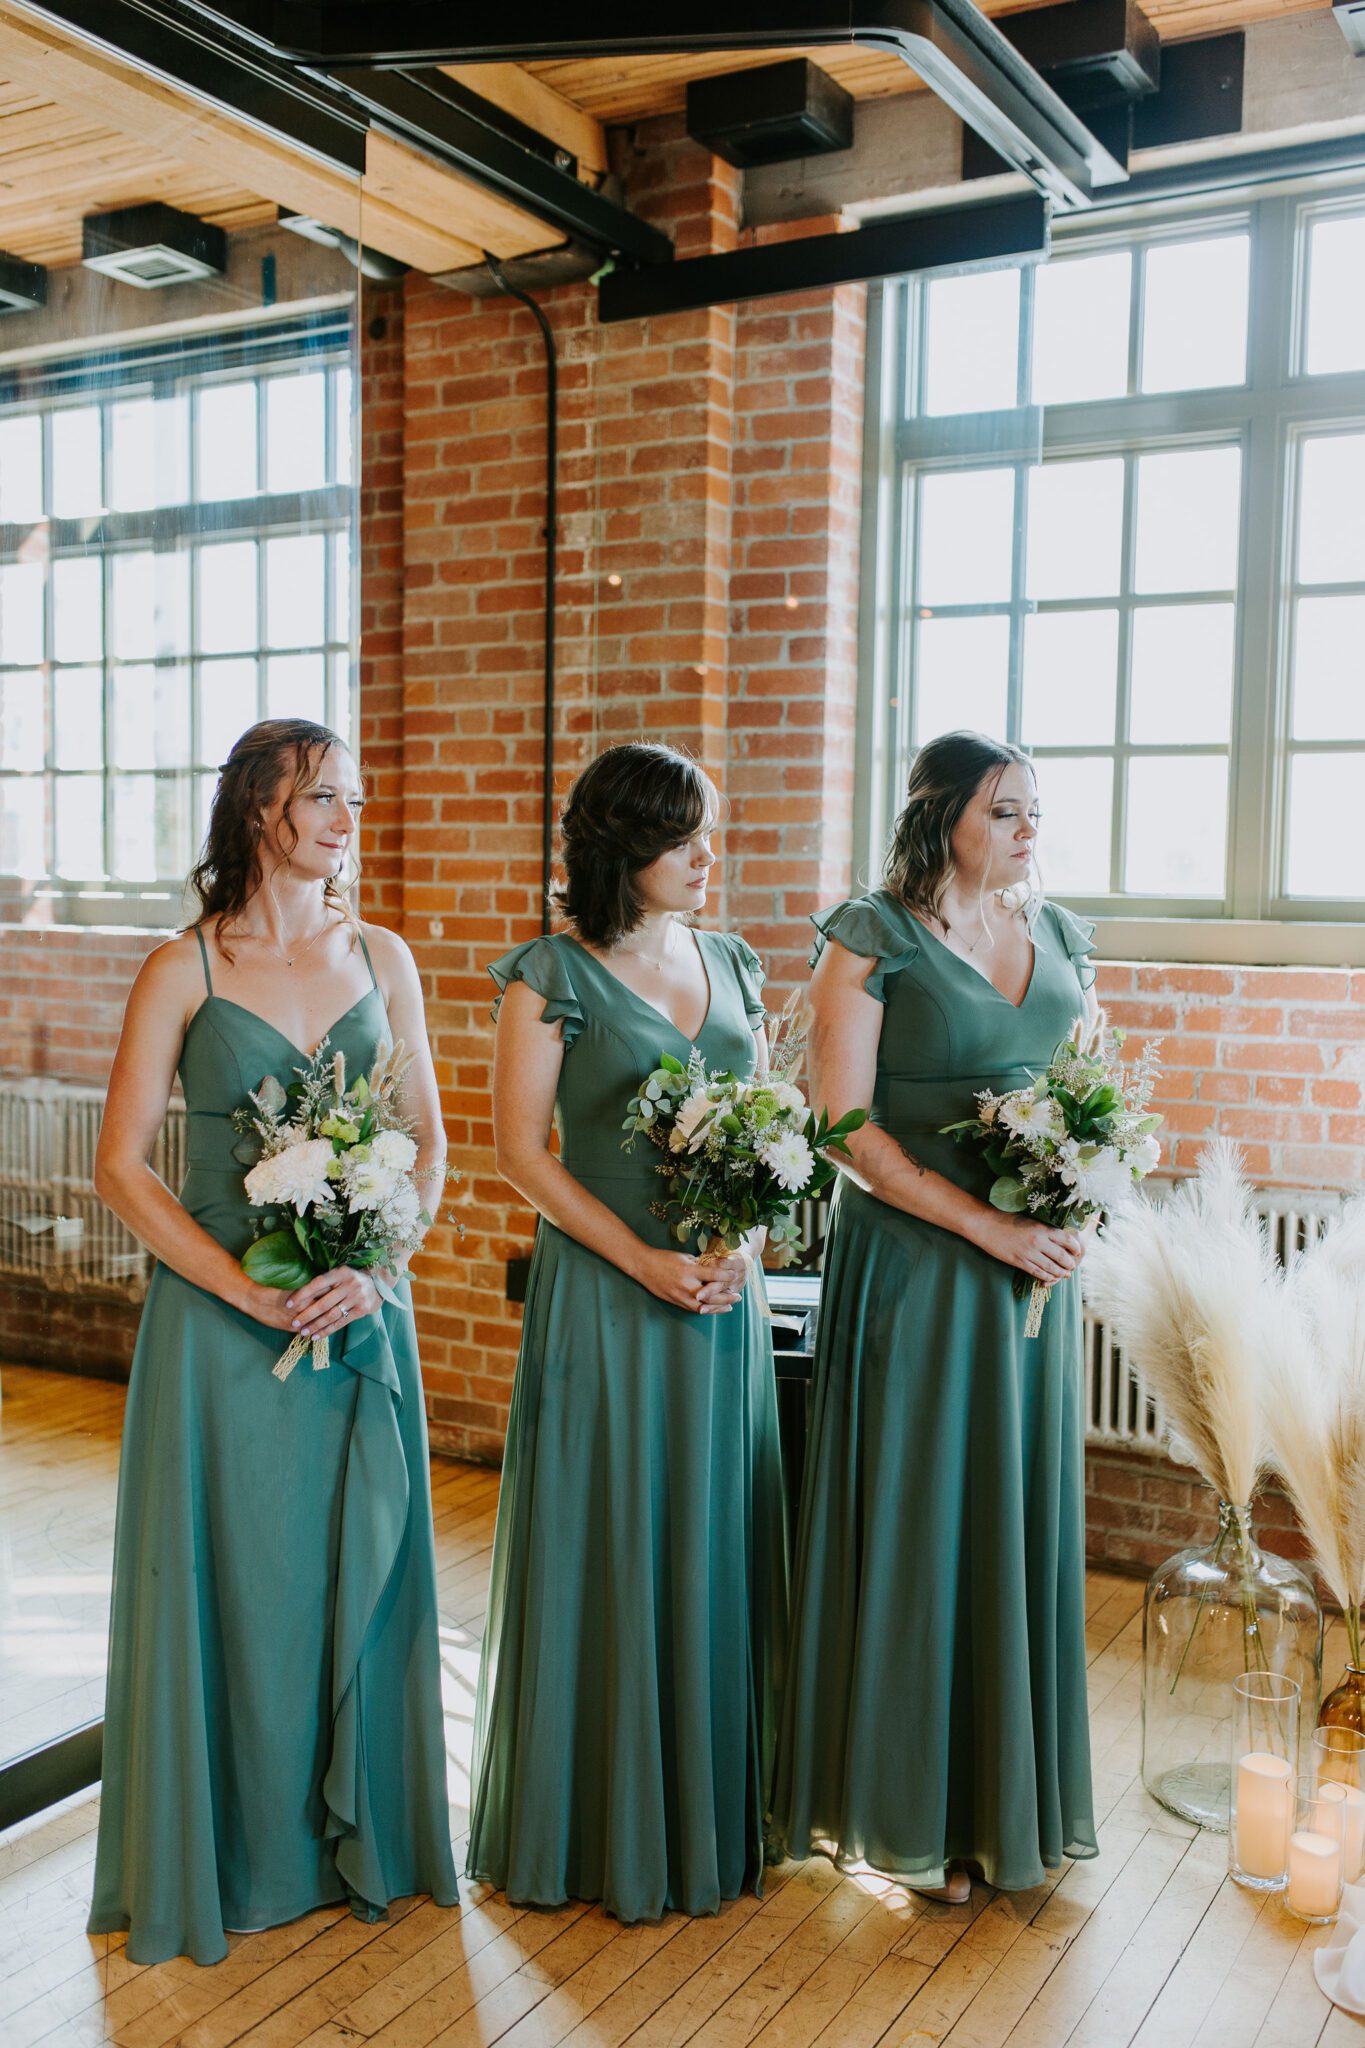 Bridesmaid's in sage dresses, white and green wedding bouquets